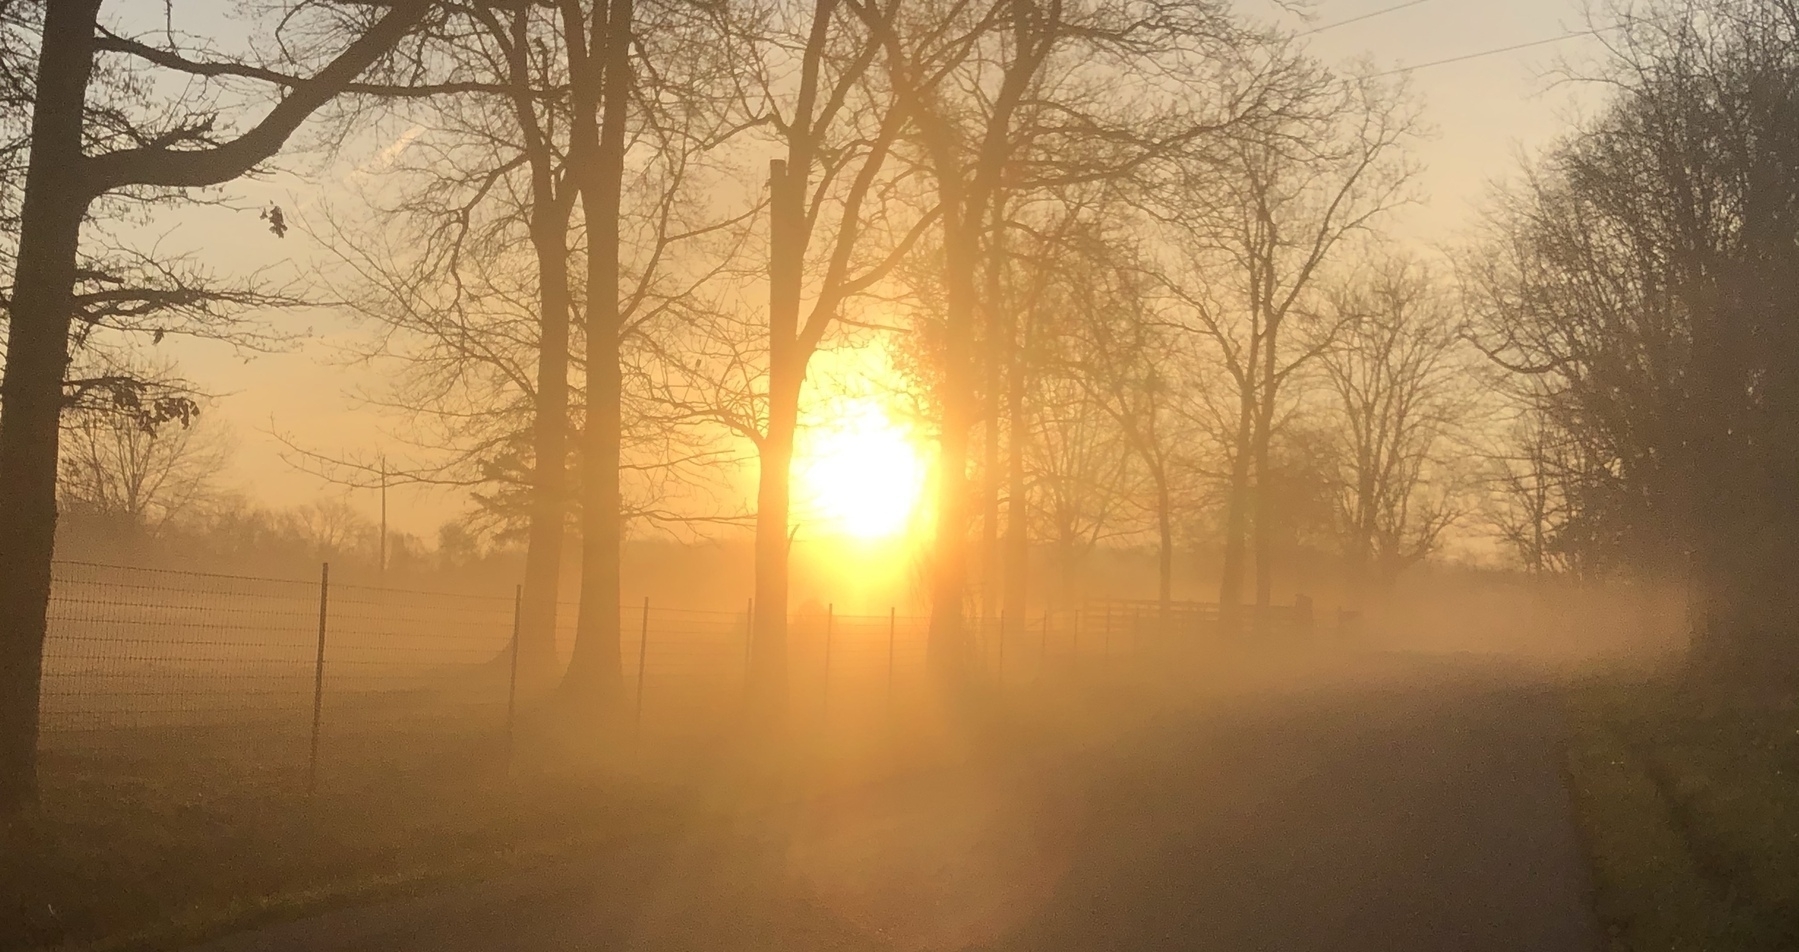 The golden sun is rising through early morning fog and trees.